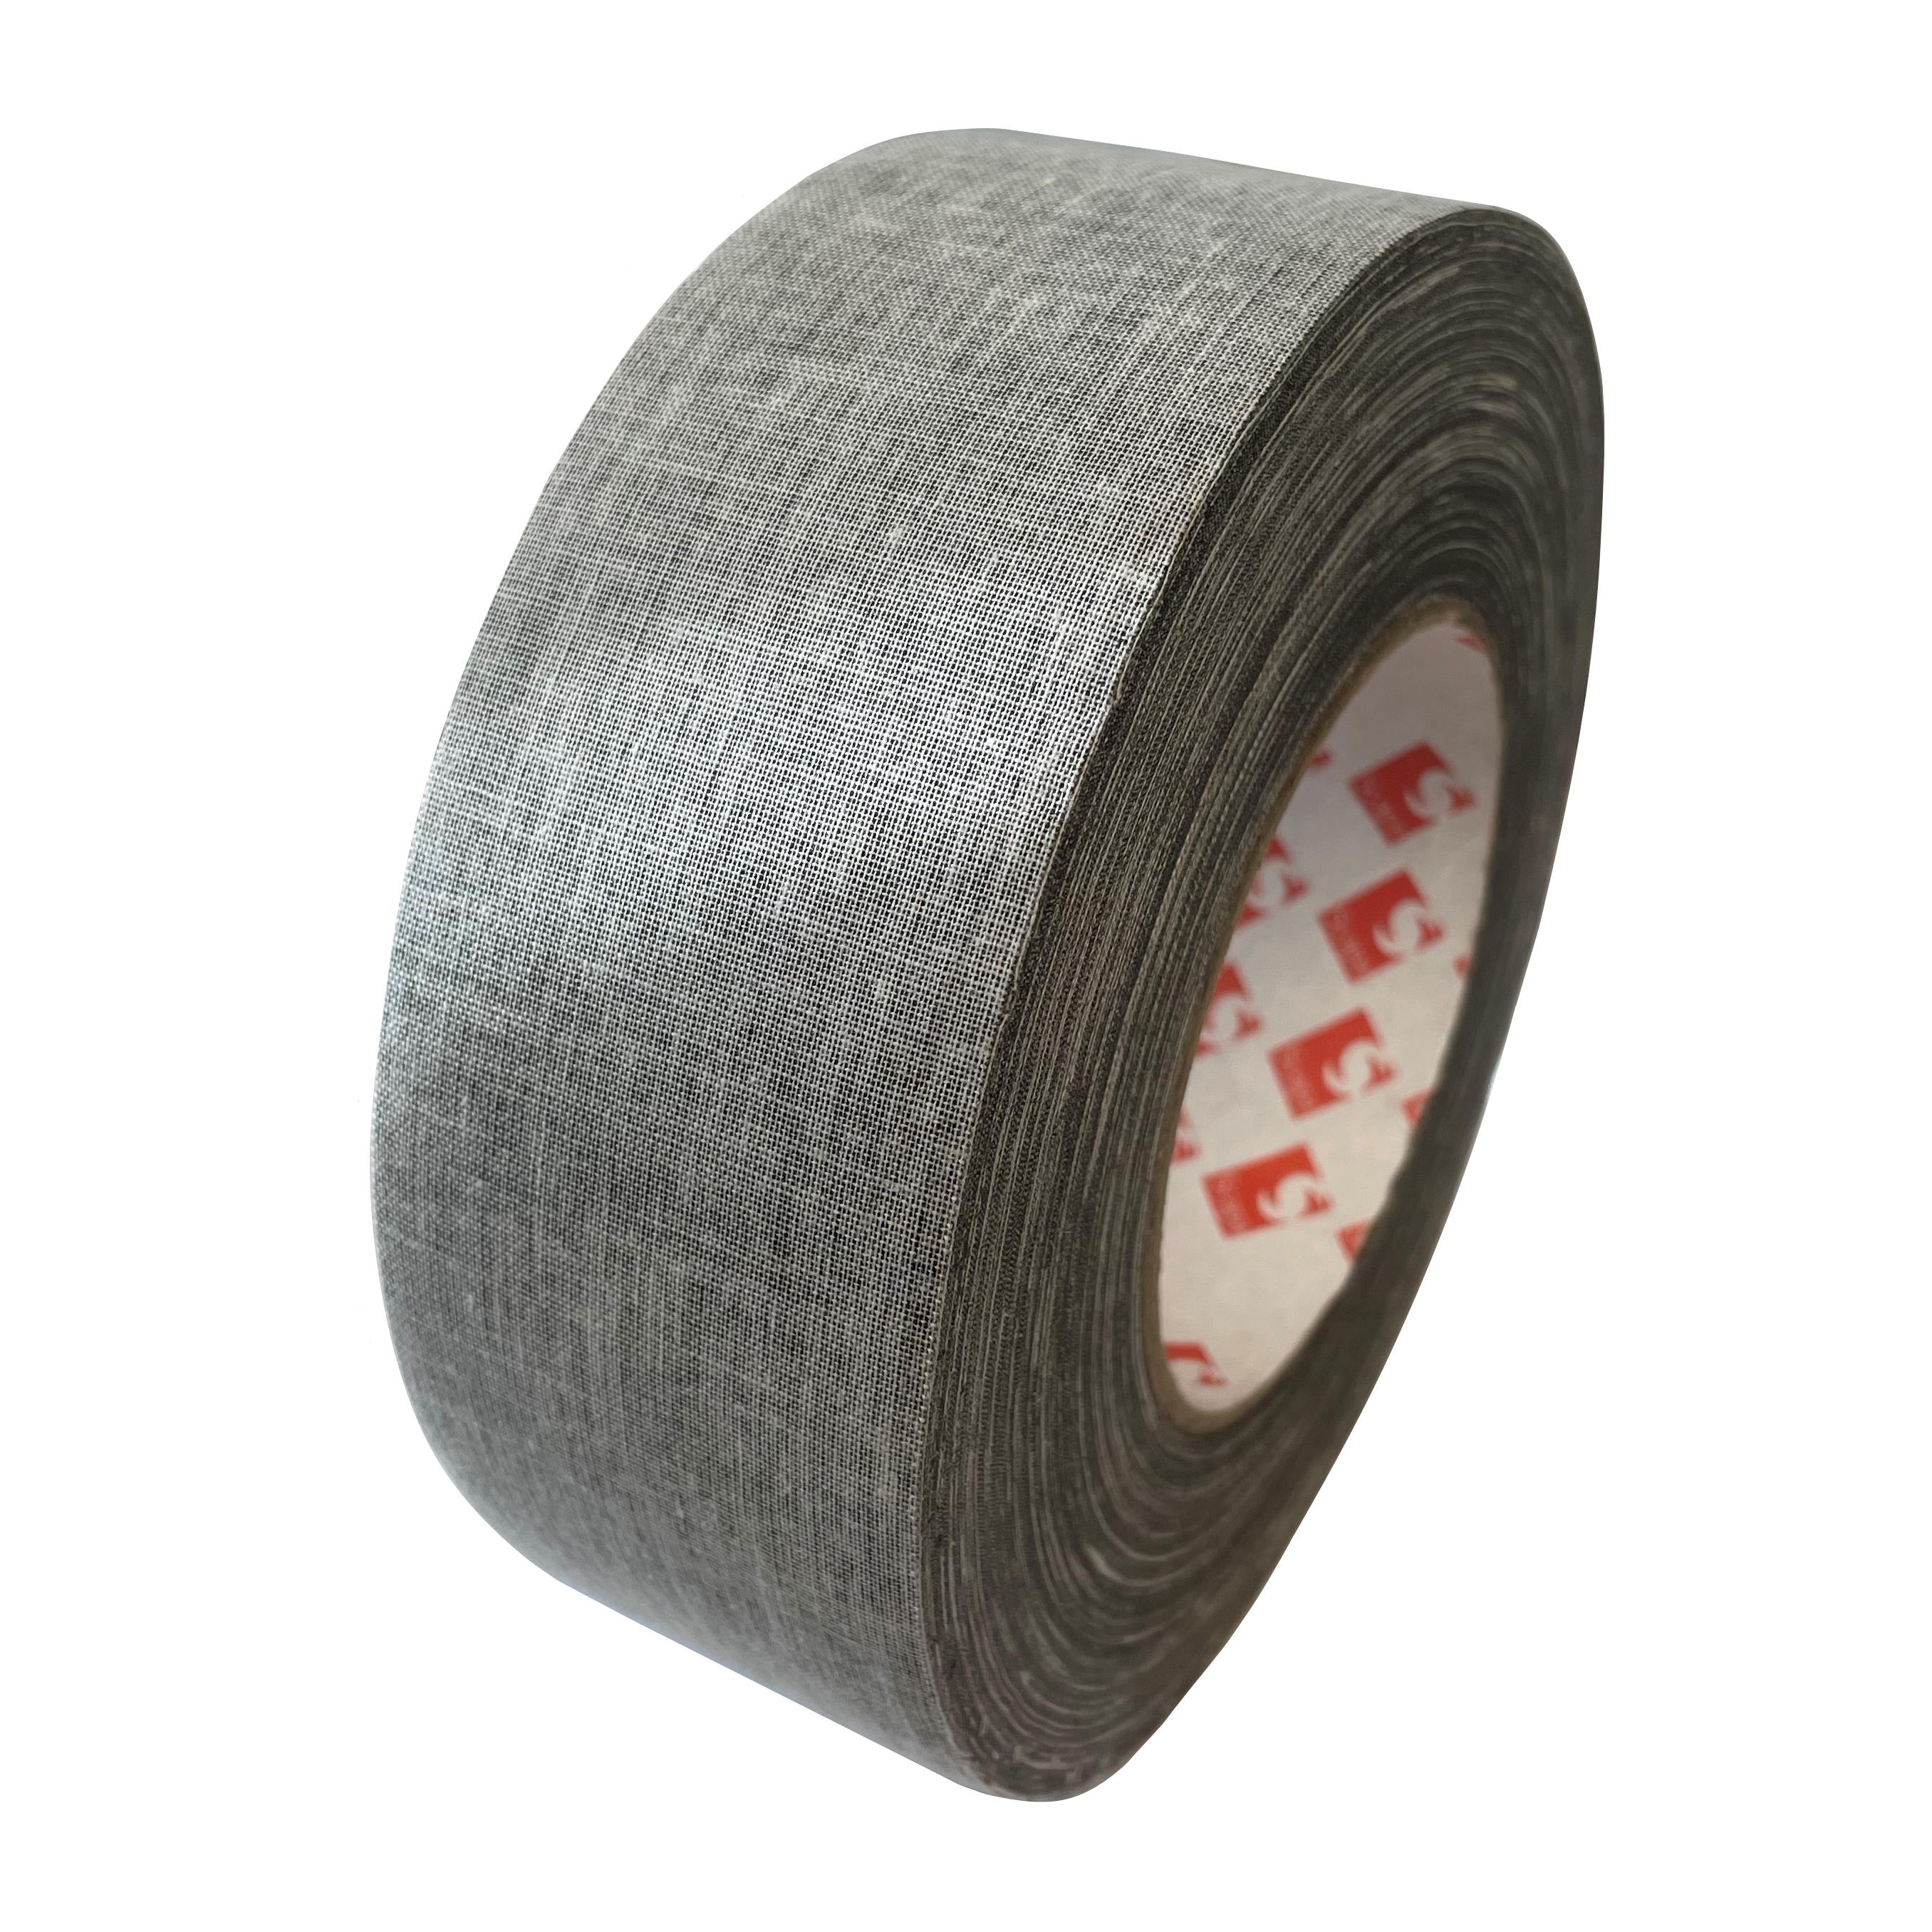 Scapa CoverGard 3364 Cotton protective fabric masking tape, 100mmx50m, grey